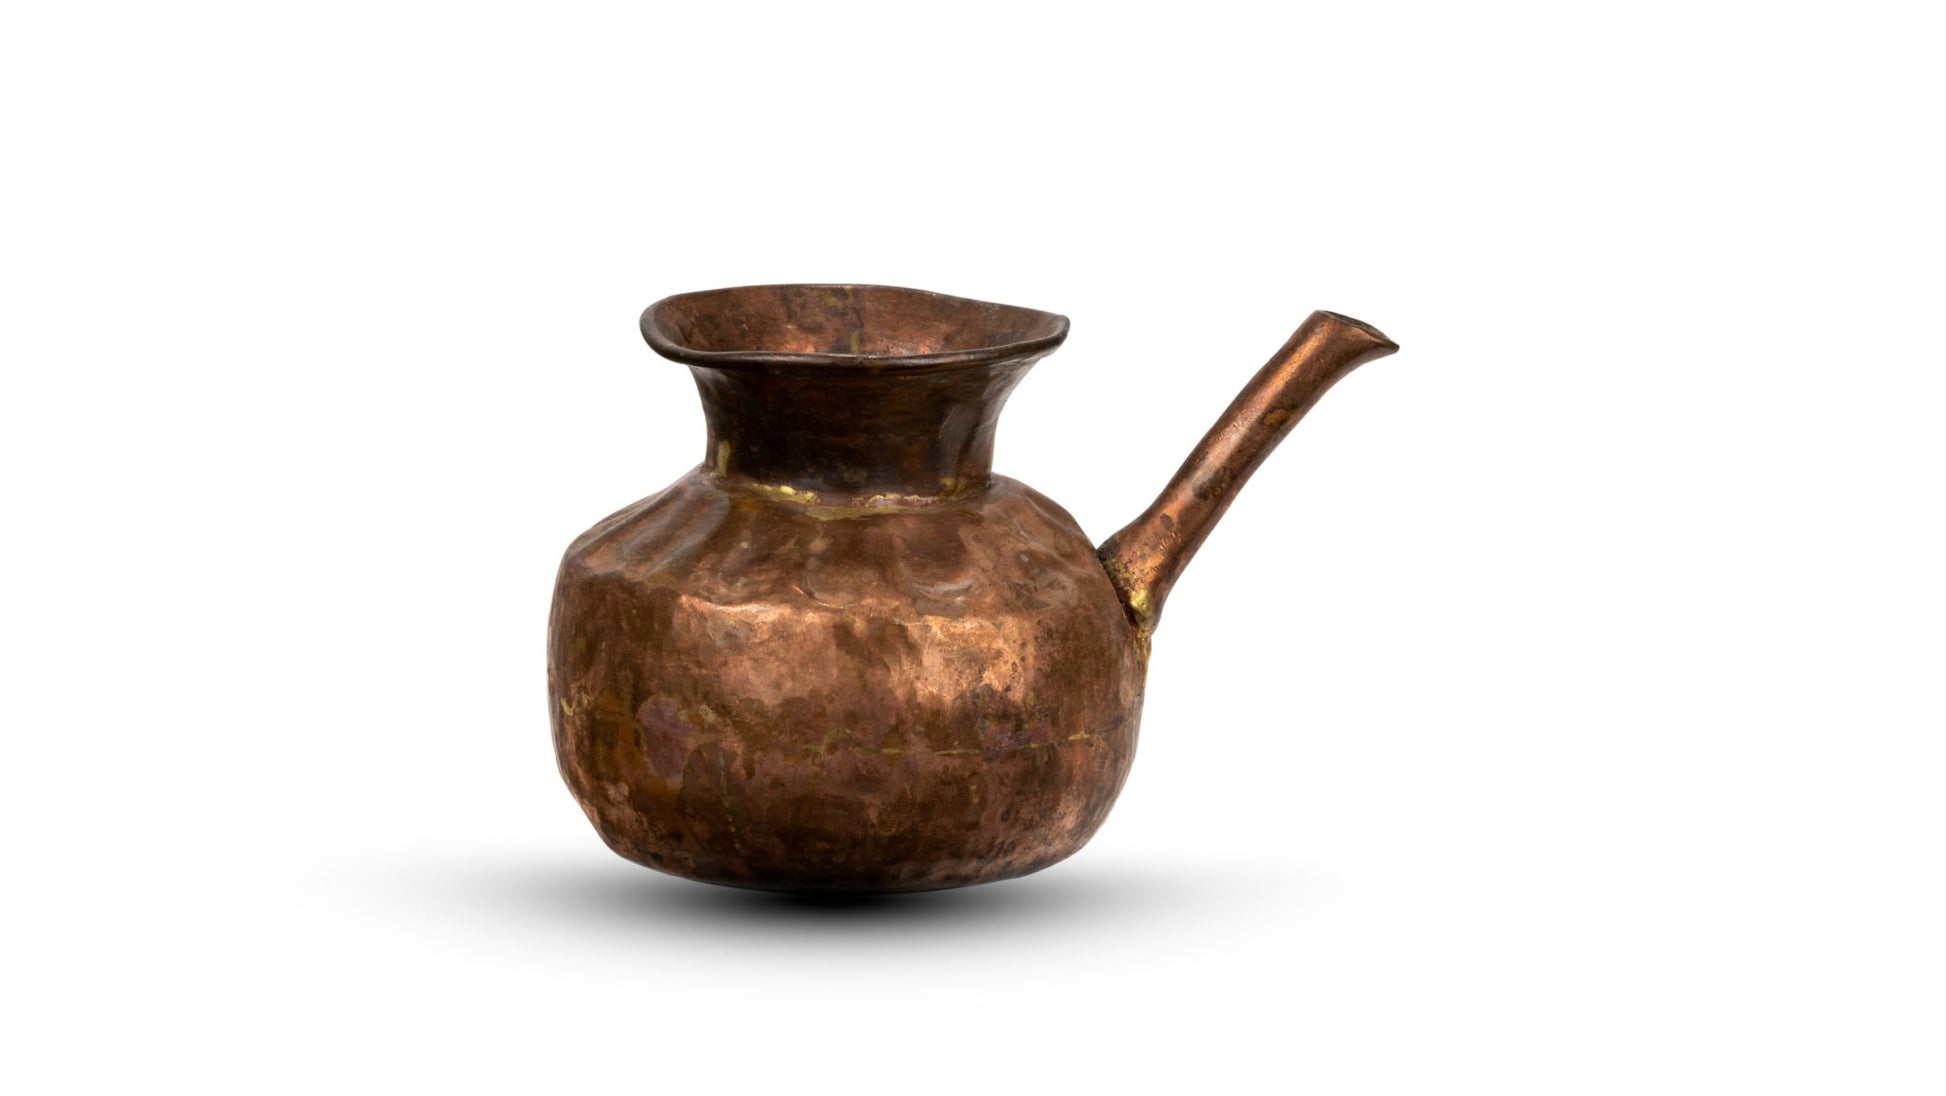 Handcrafted copper pot from Almora in white background for decorative or Puja purposes.